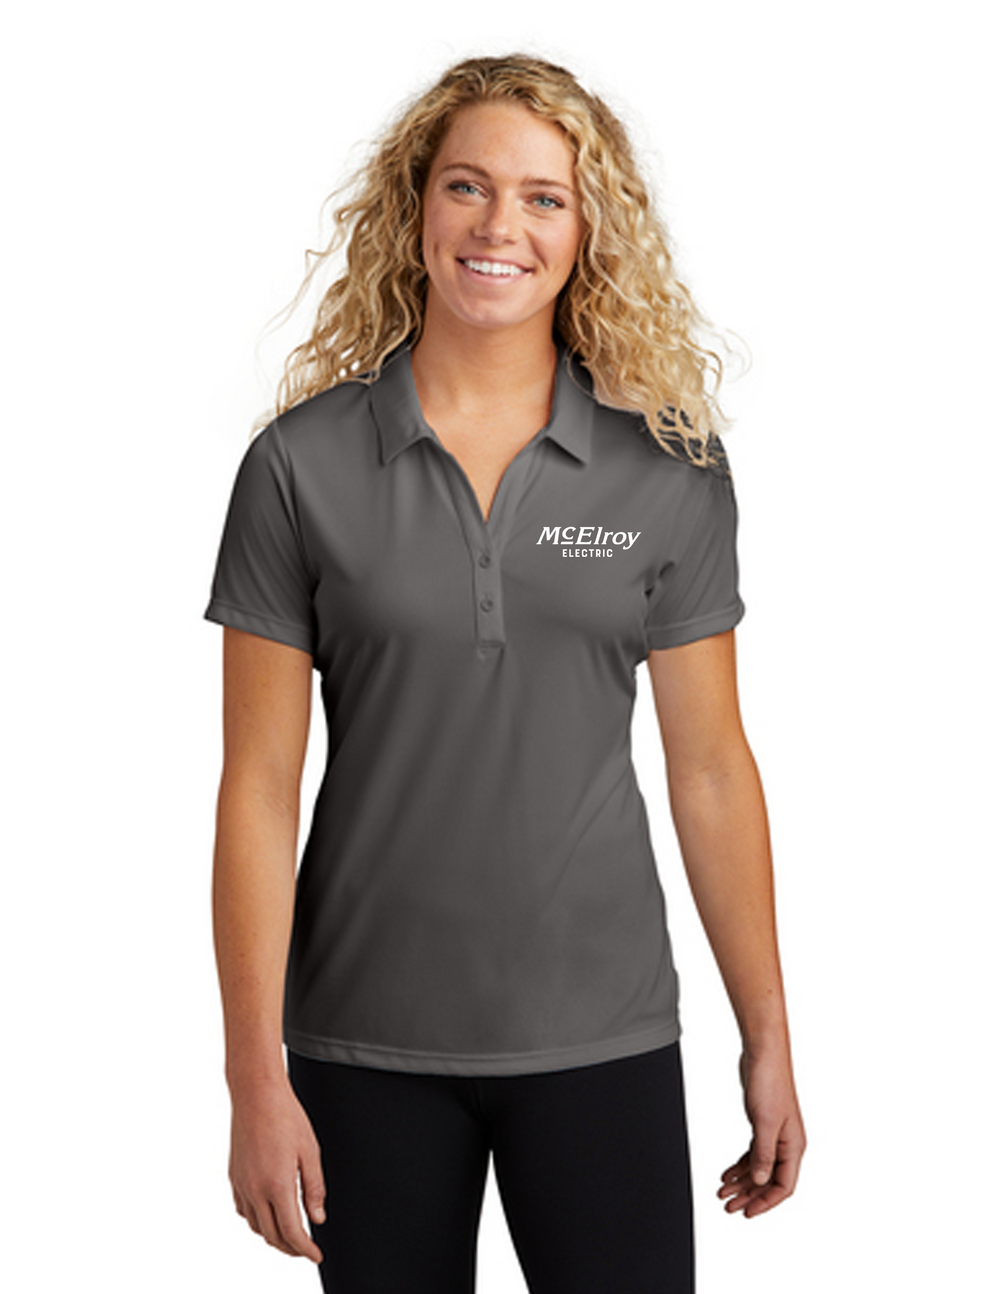 McElroy Electric - Sport-Tek Ladies PosiCharge Competitor Polo - LST550